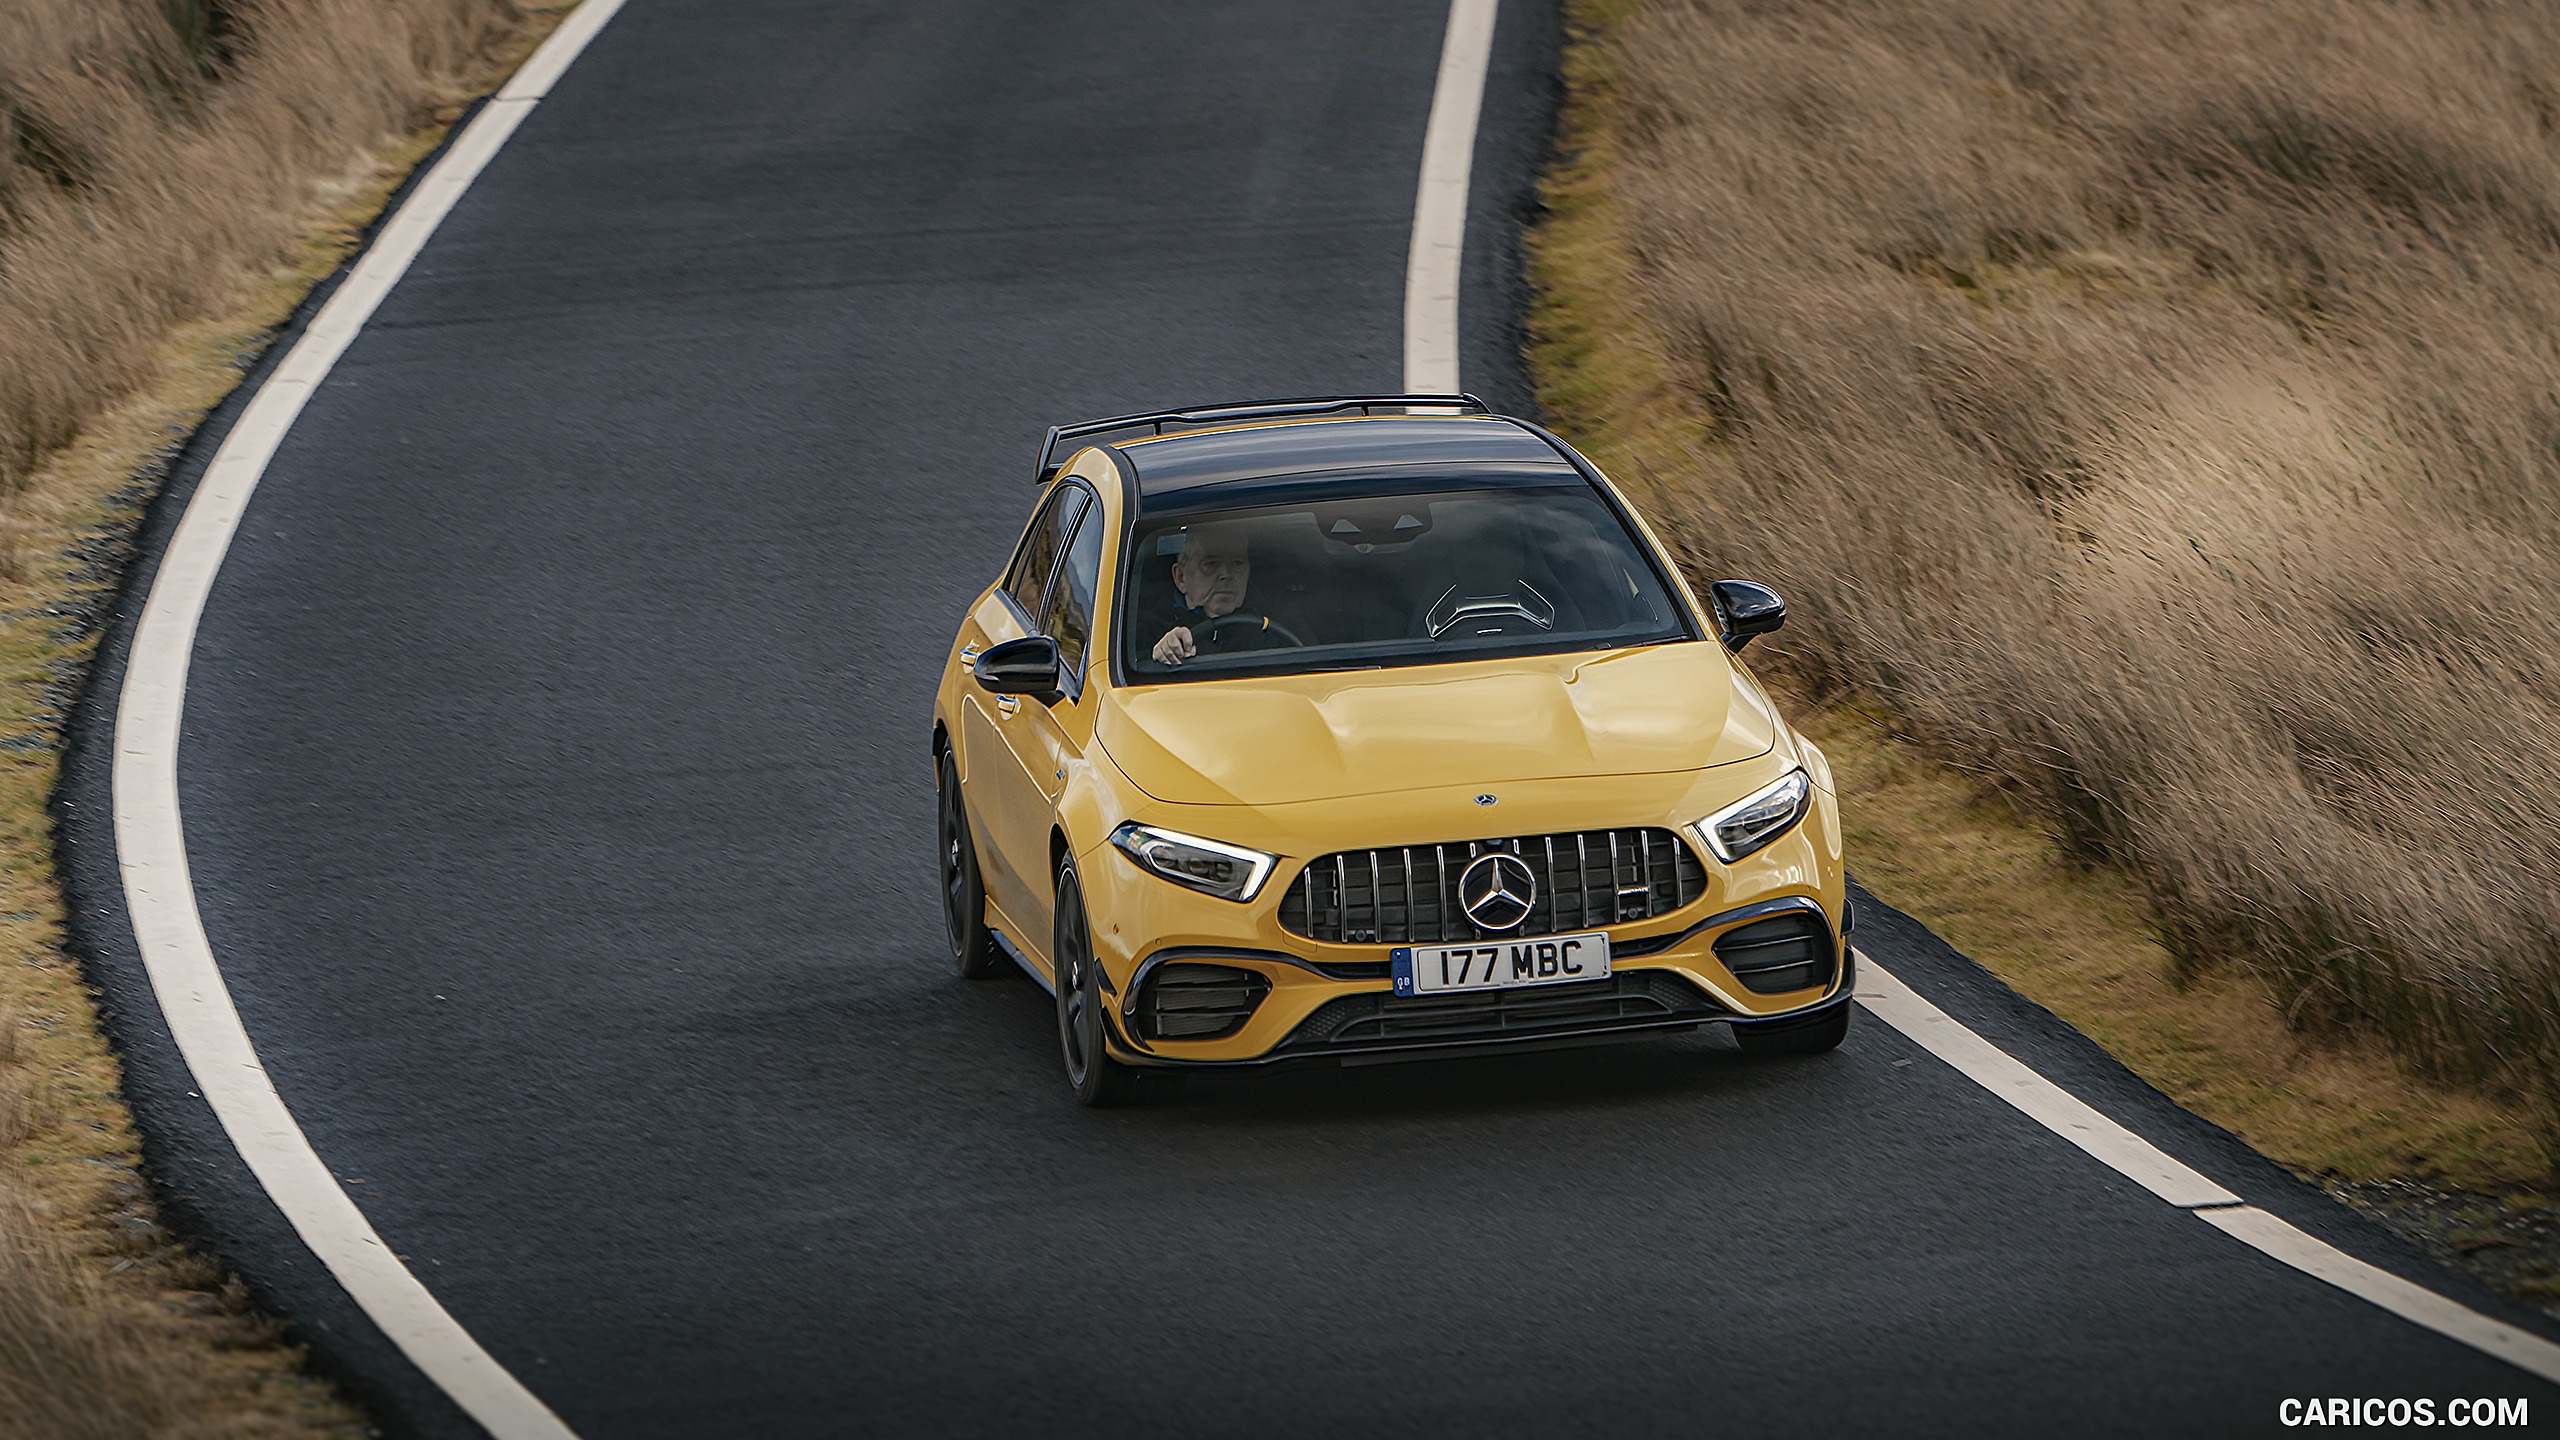 2020 Mercedes-AMG A 45 S (UK-Spec) - Front, #146 of 188